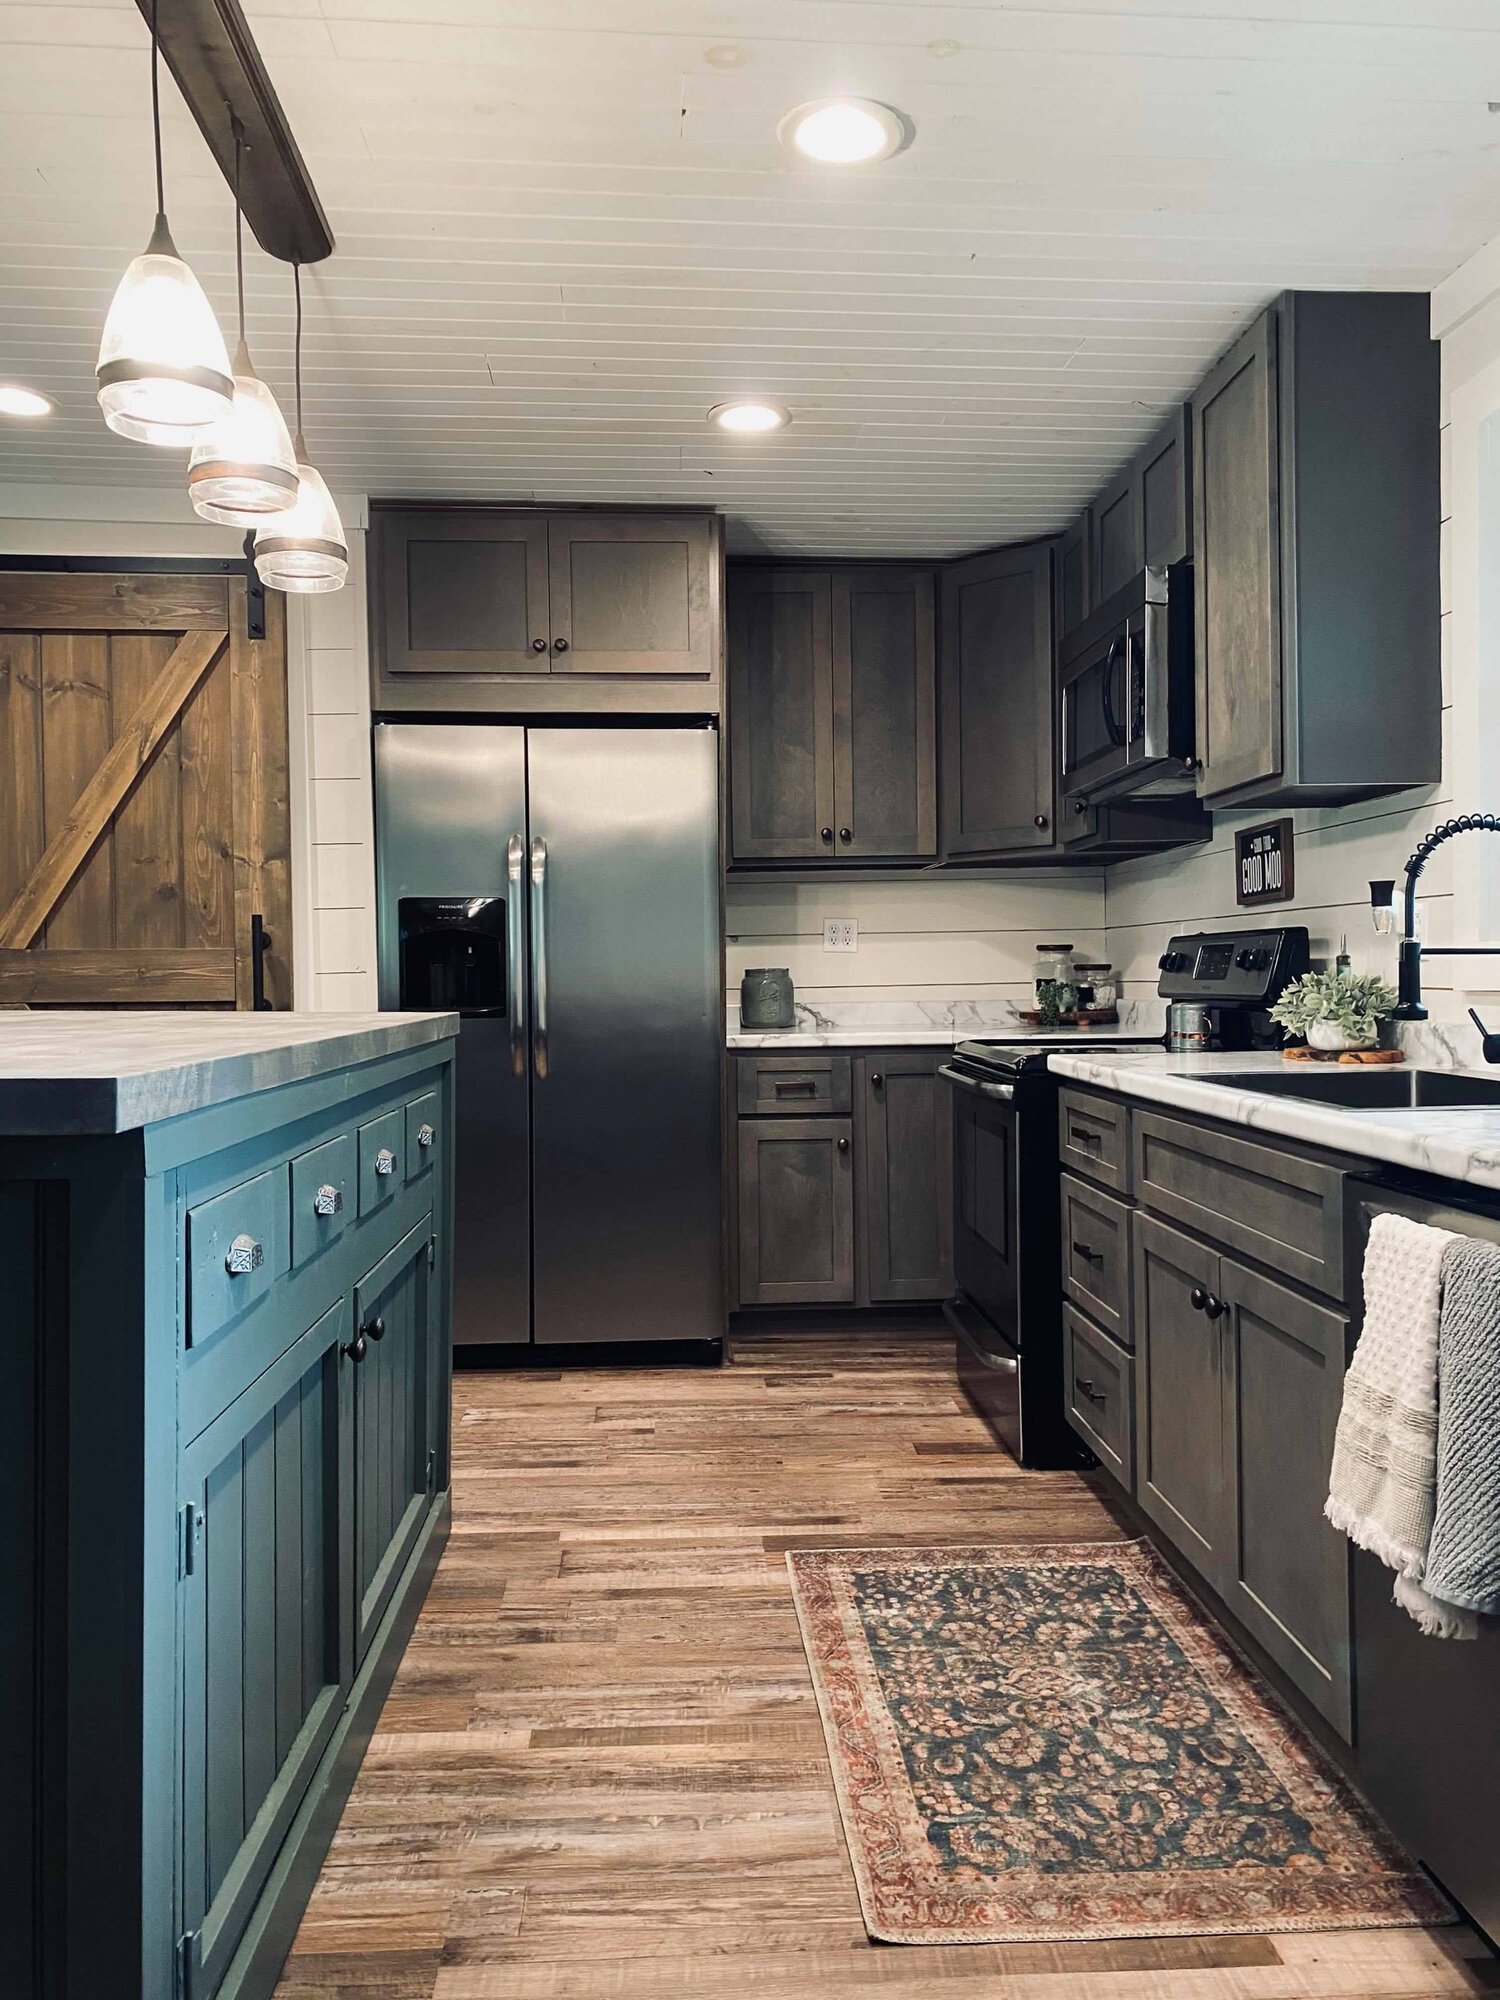  All the experience that Dana got working on her clients’ kitchens culminated in a wonderful renovation of her own kitchen that is full of jaw dropping color! She put so much inspiring thought and hard work into this room! 